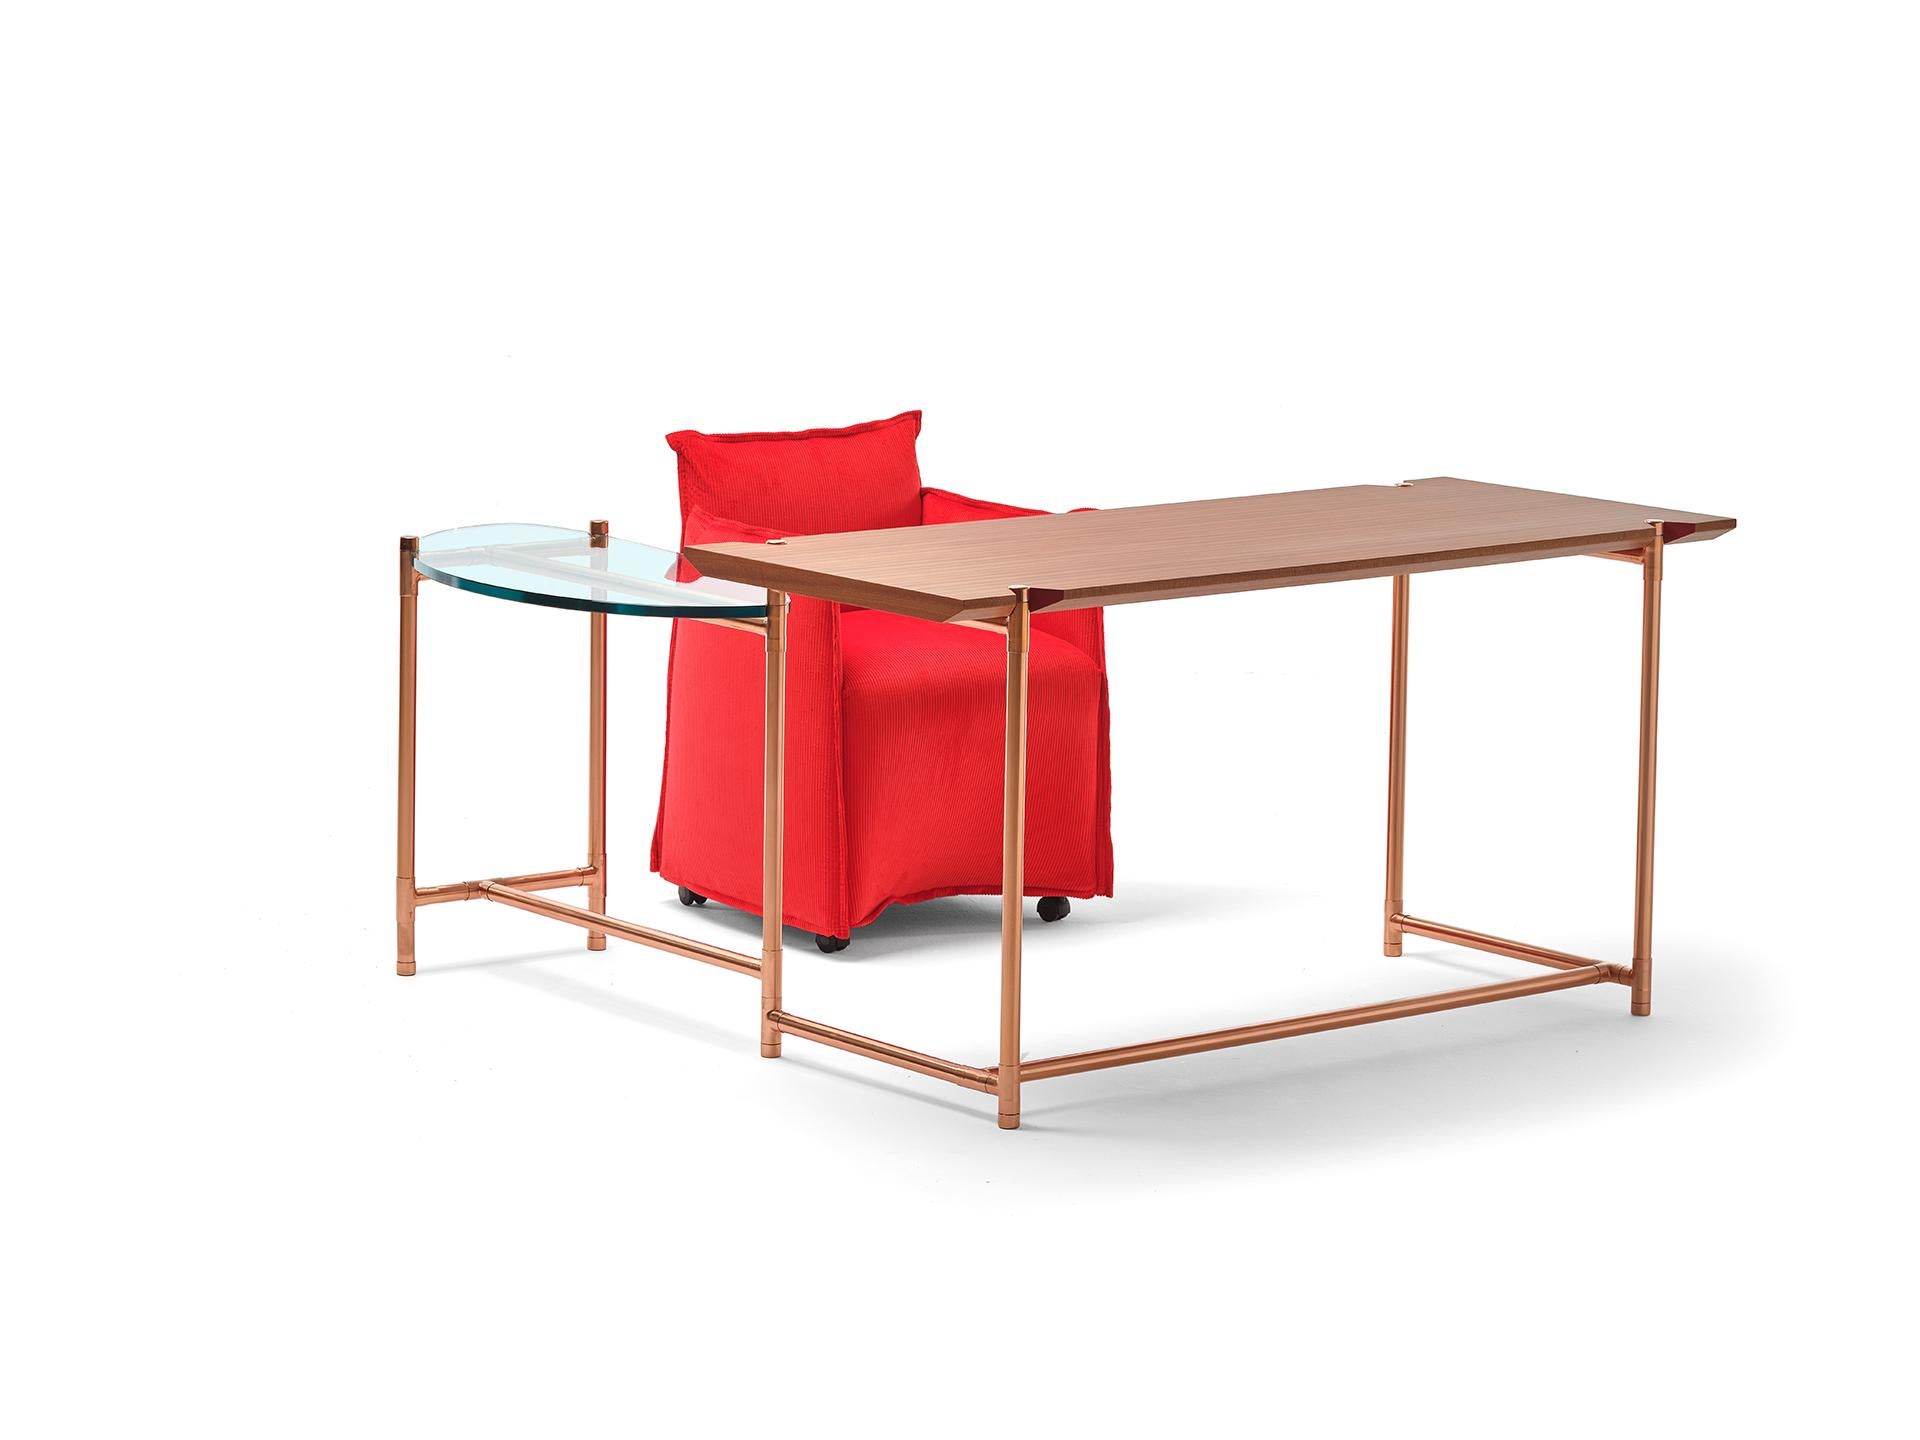 An original desk with a wooden top and a glass extension that can rotate around a central pivoting point, like the hand of a clock. This allows the table to expand and contract its usable surface and to adapt to different uses: a dedicated support